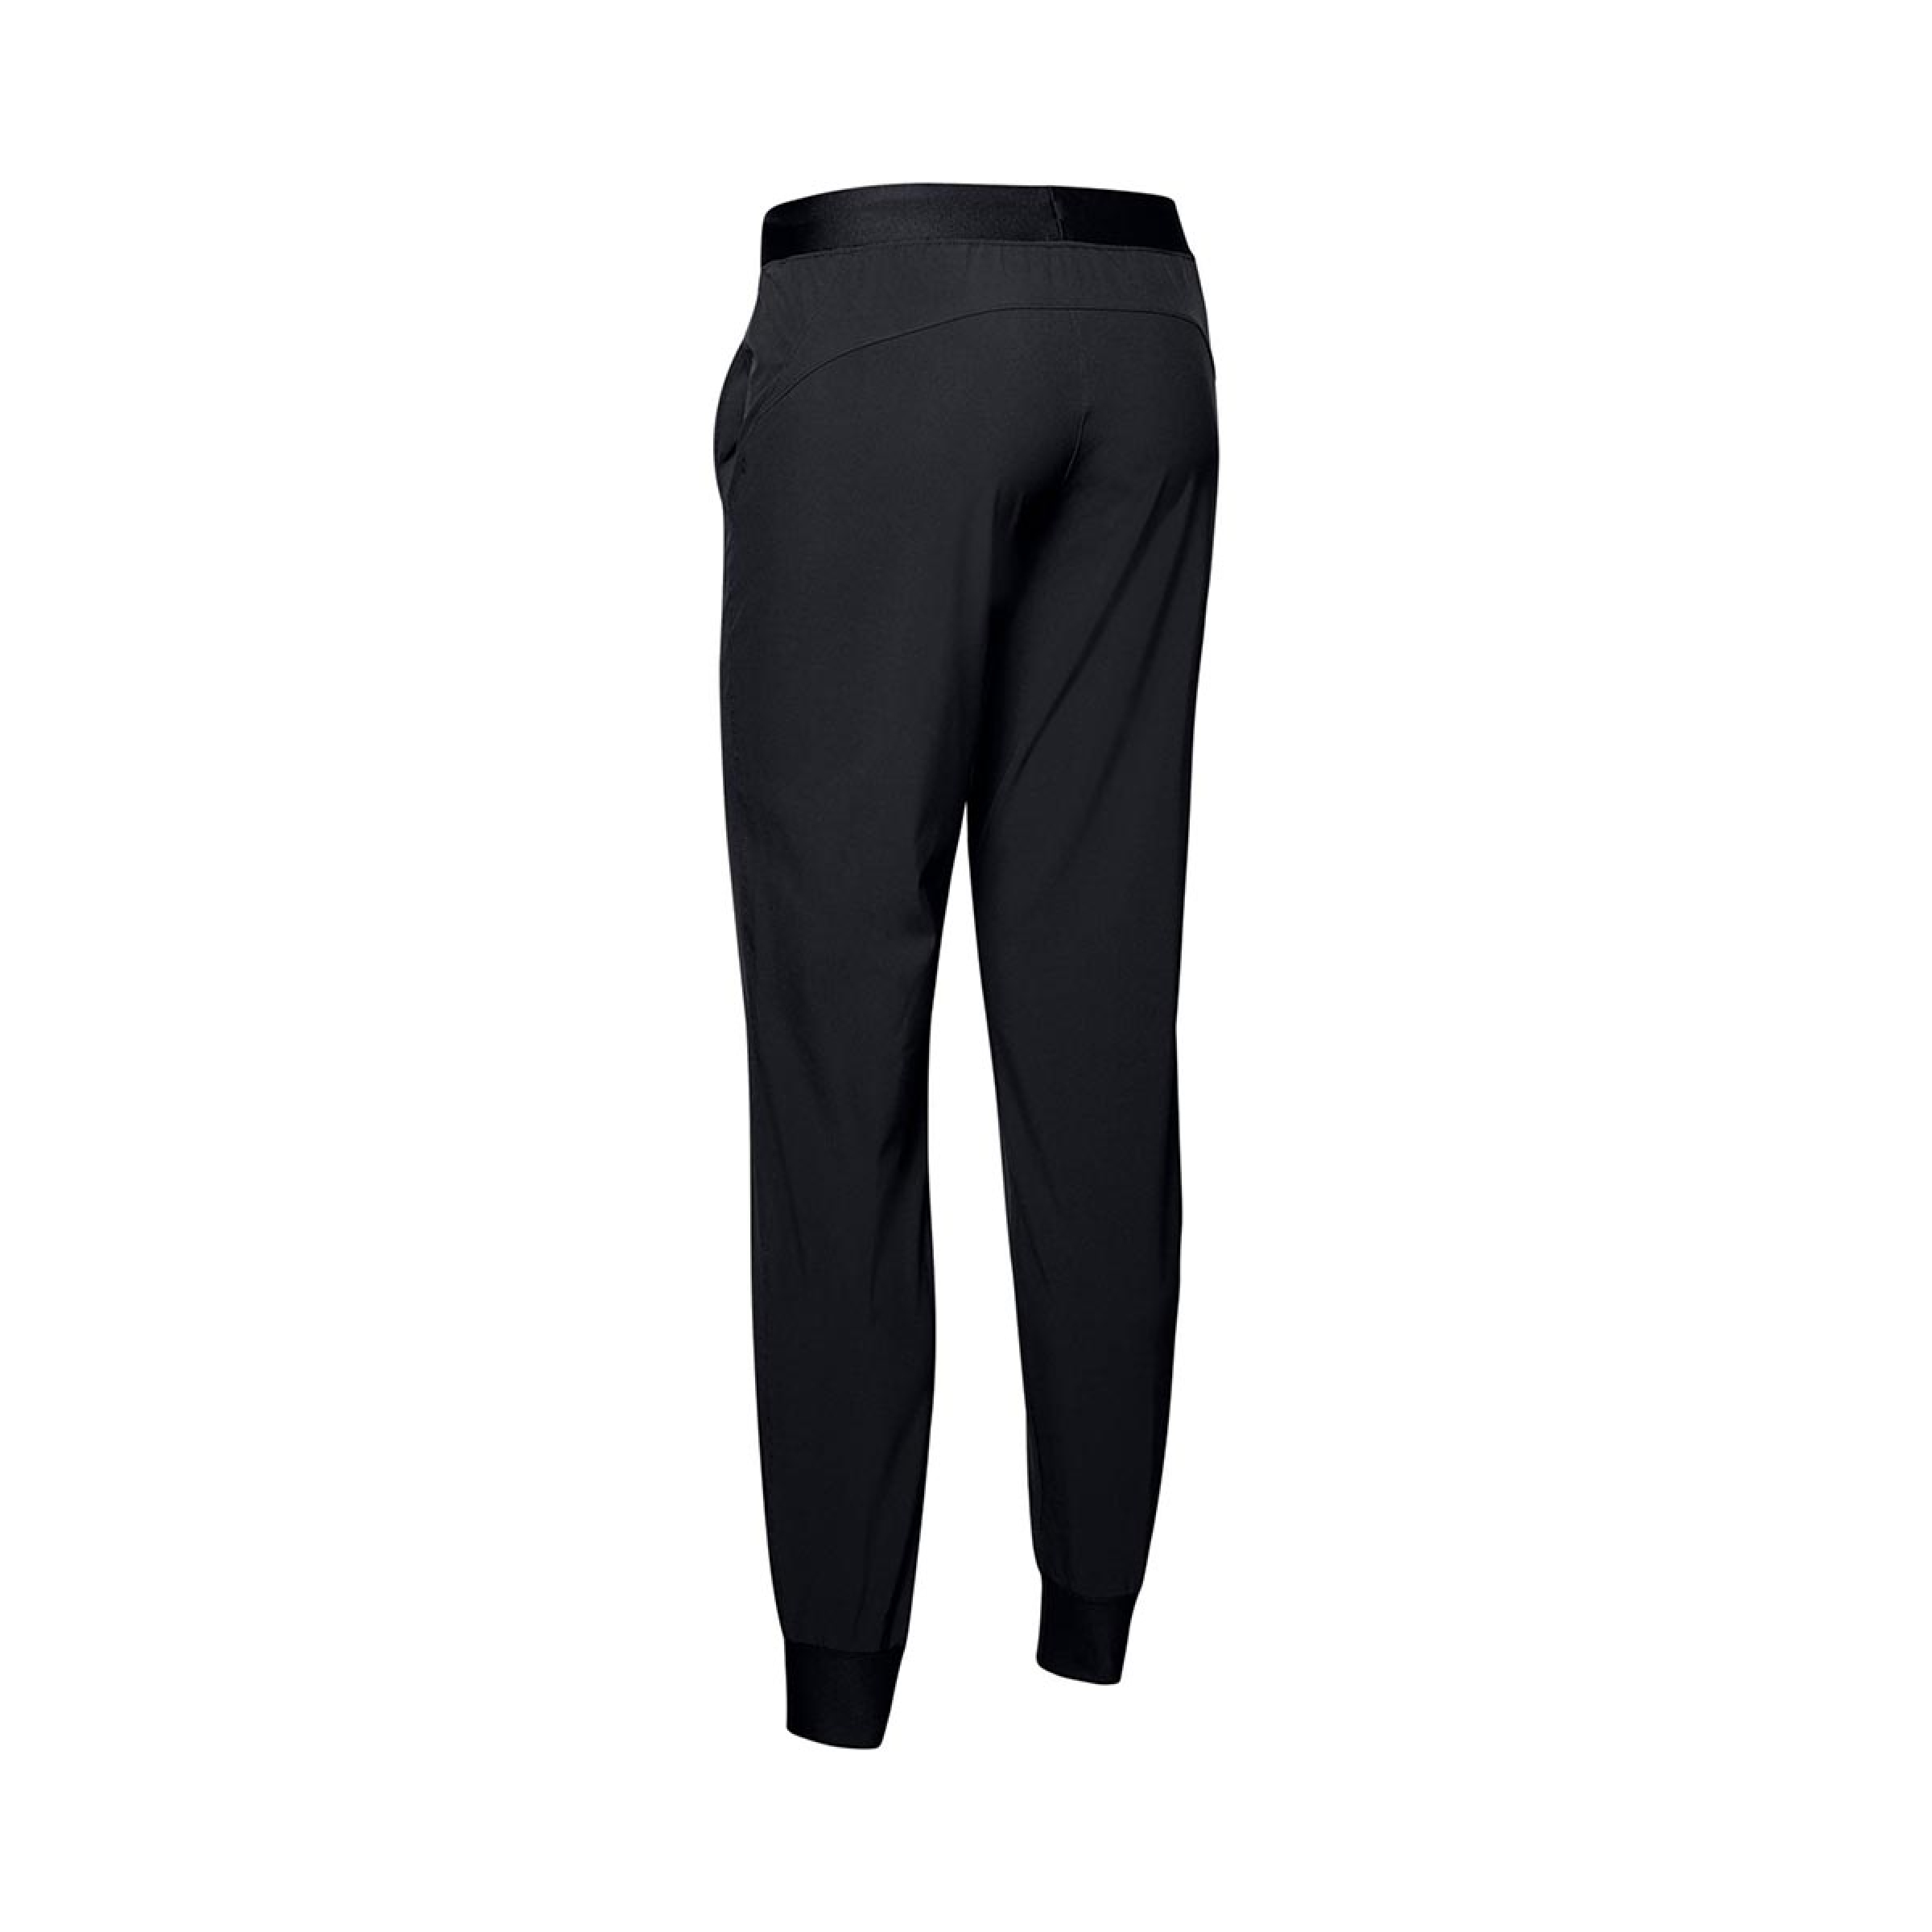 Under Armour - ARMOUR SPORT WOVEN PANT (1348447 001)